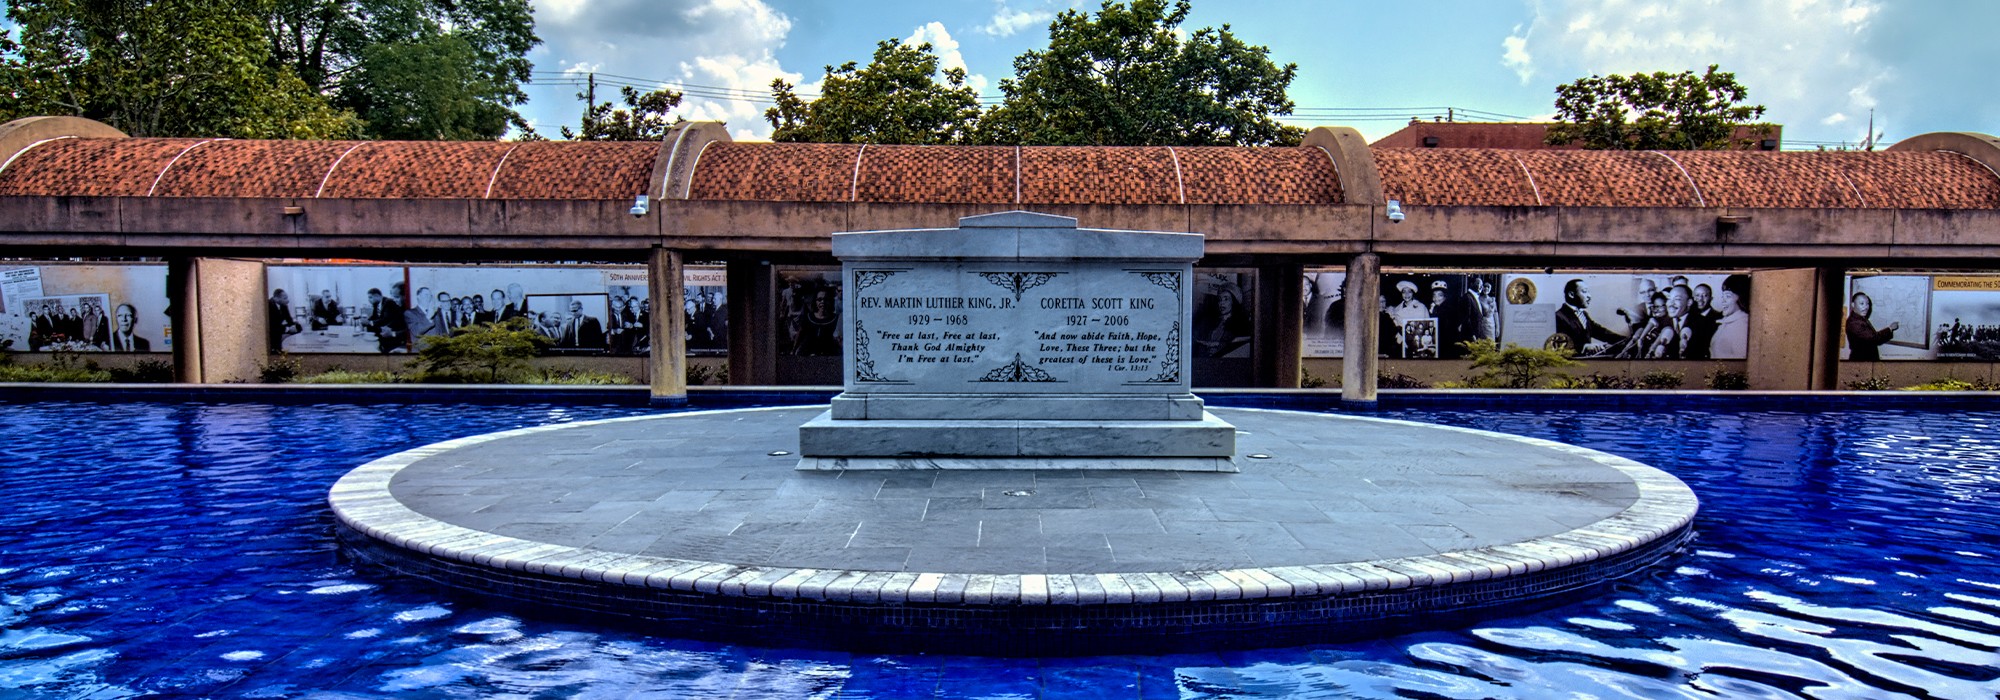 The King Center and Martin Luther King Jr. National Historic Site -  Atlanta: Get the Detail of The King Center and Martin Luther King Jr.  National Historic Site on Times of India